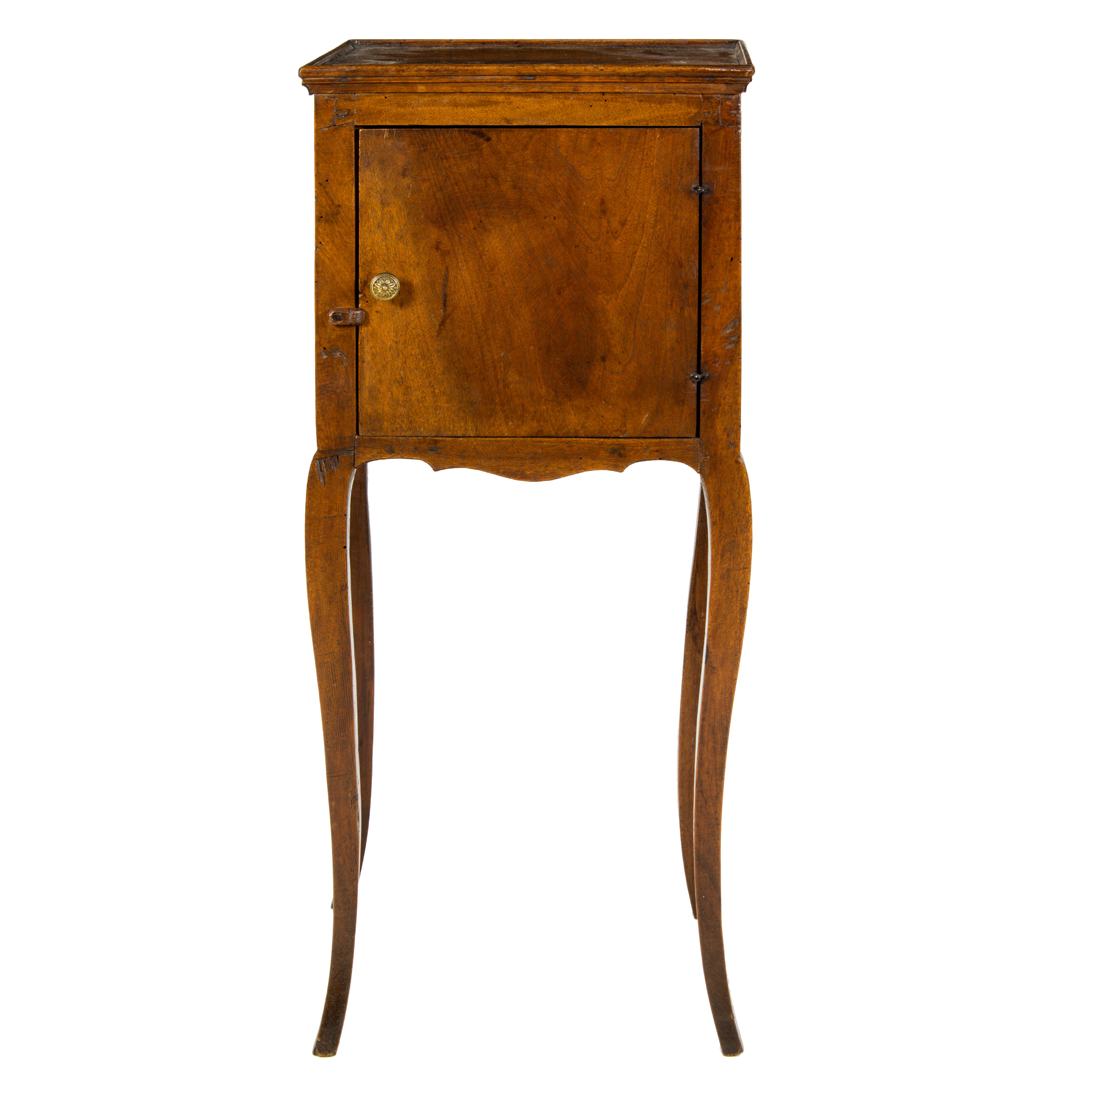 A FRENCH PROVINCIAL COMMODE A French